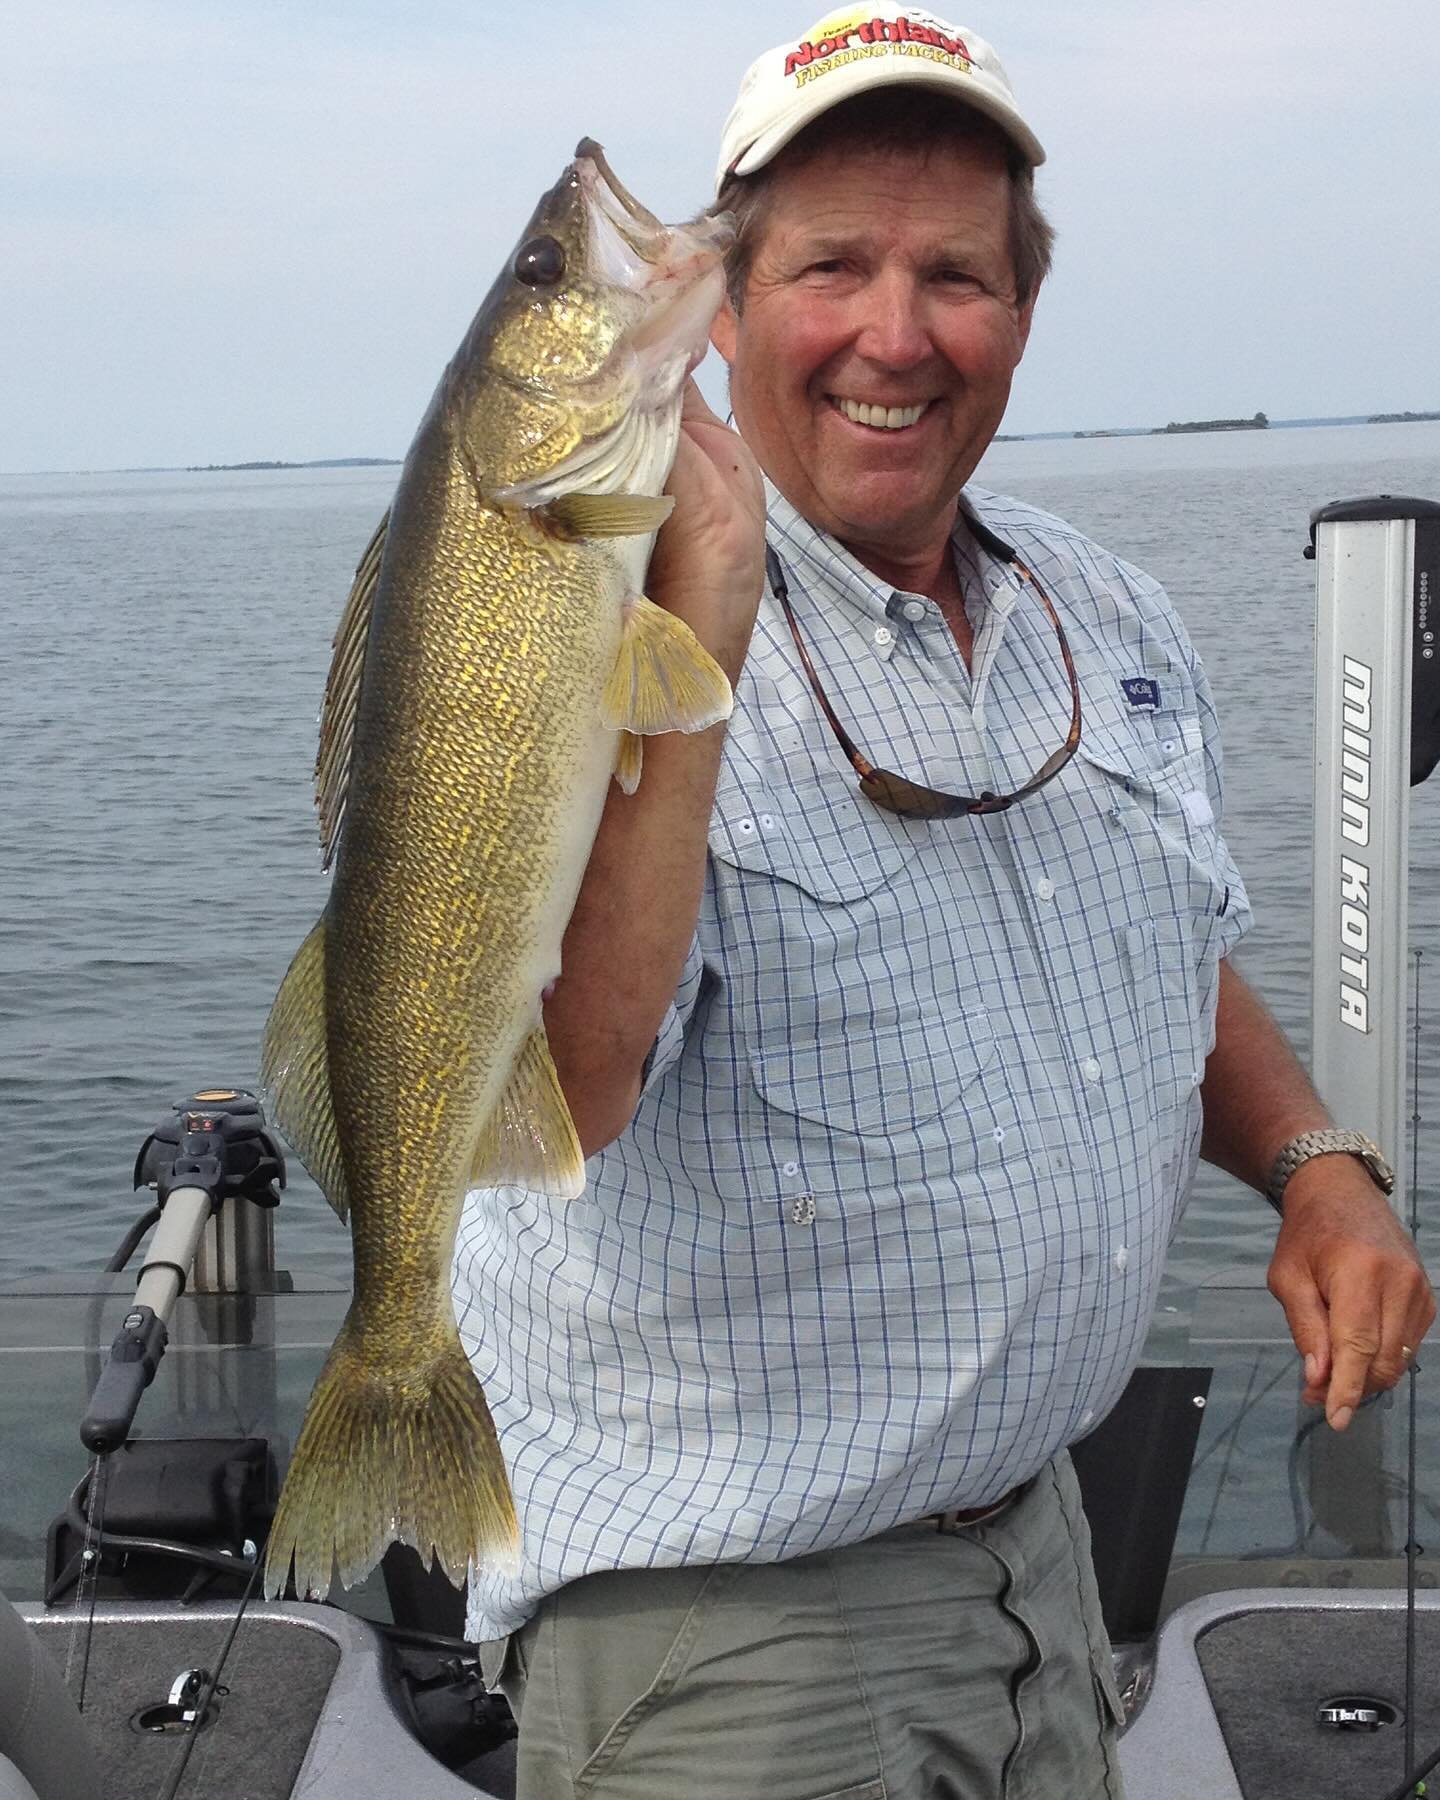 NEW PODCAST: Over his many years of travels and storytelling, Ron Schara has met all walks of life&hellip; He highlights a handful of his favorite fishing characters.

Sponsored by: | @kineticowater | @titosvodka | @yourboatclub | @lakesgas | Star Ba